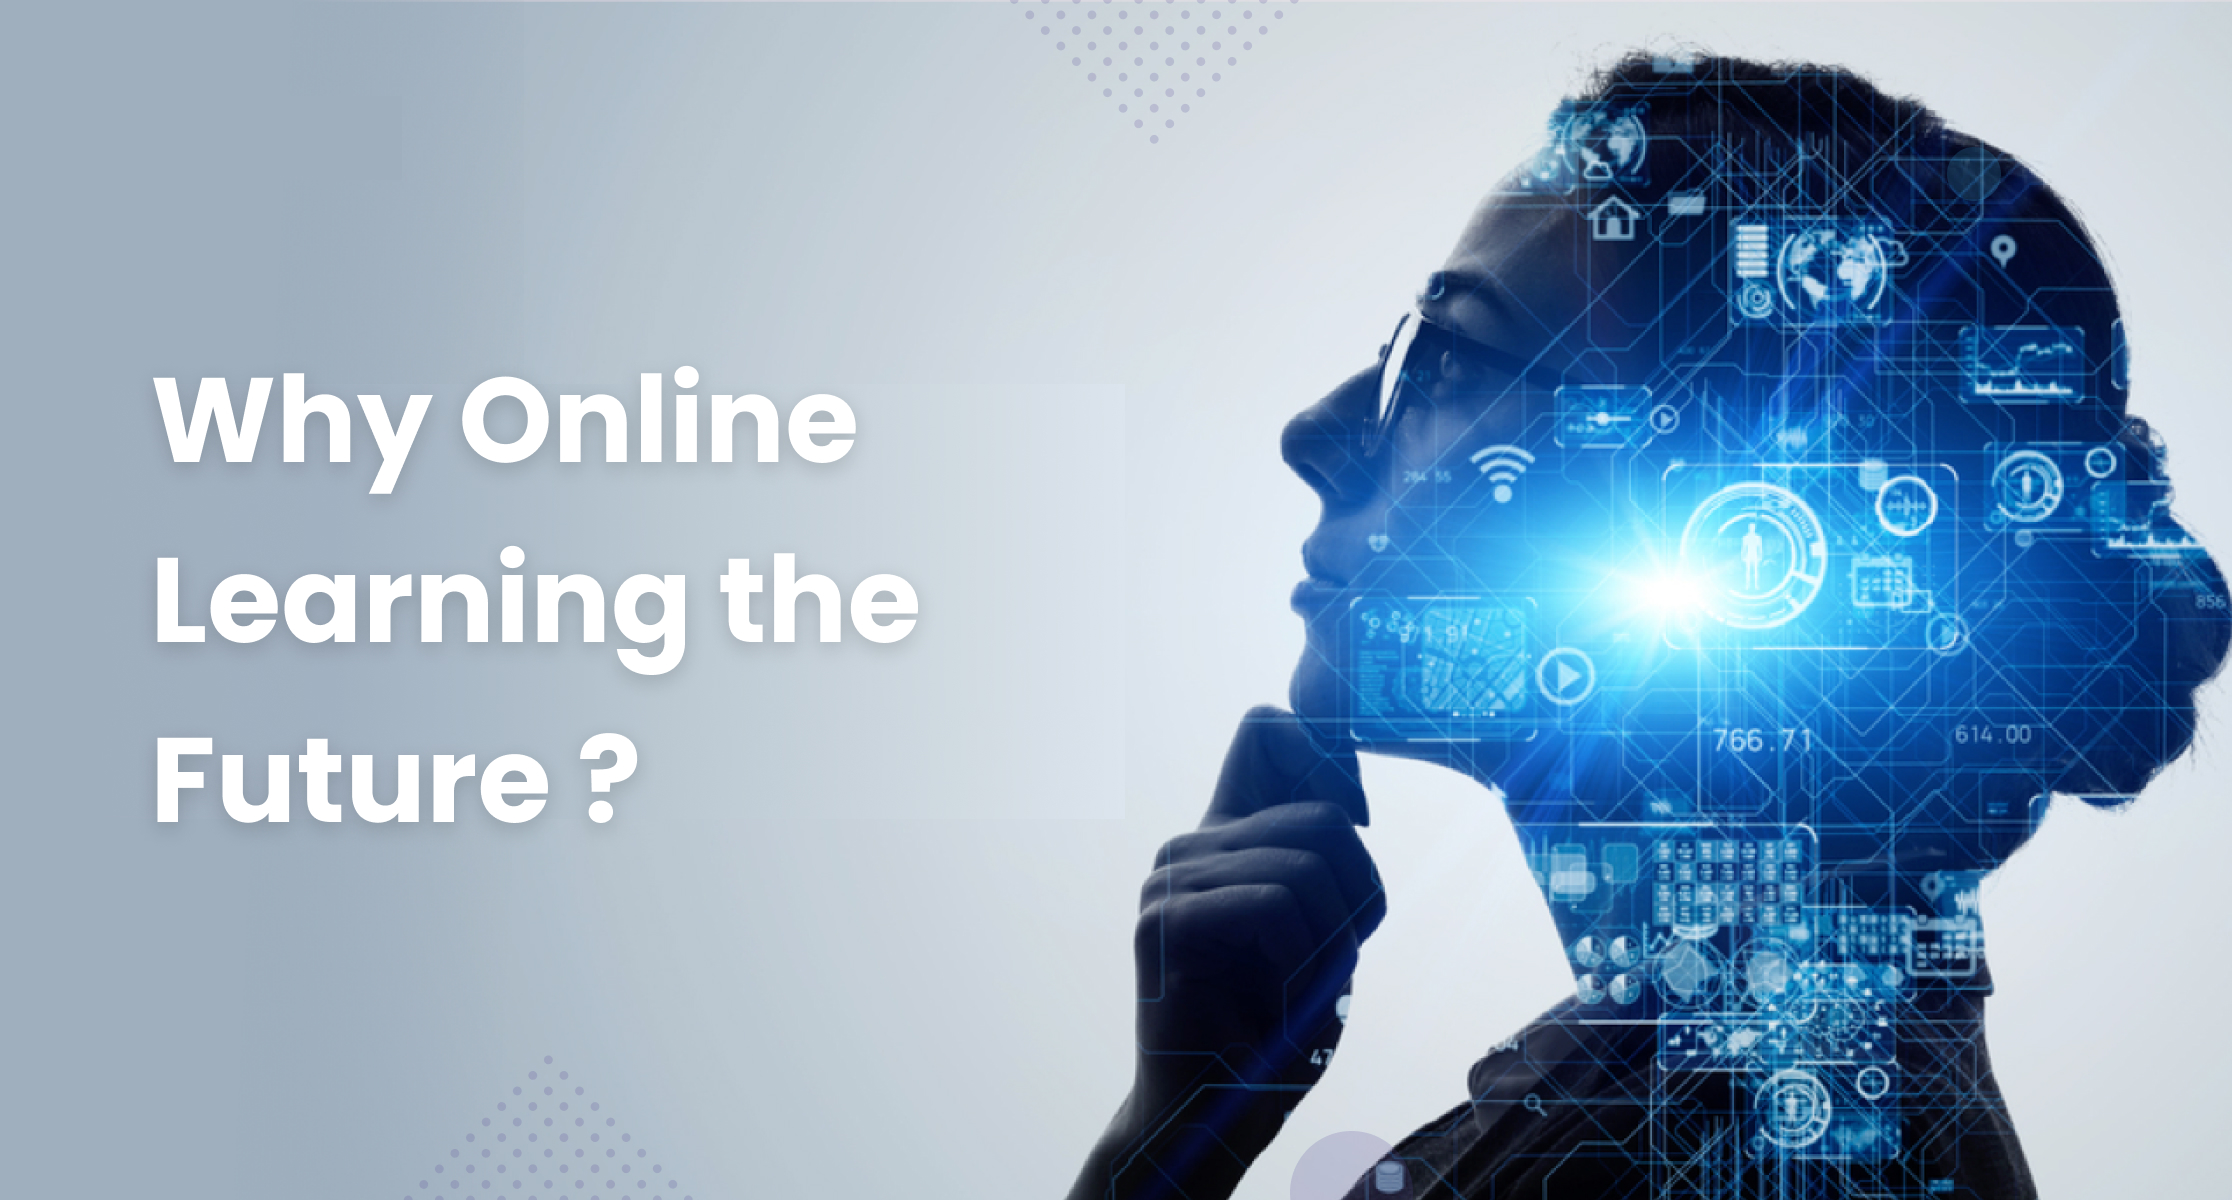 Why Online Learning the Future?